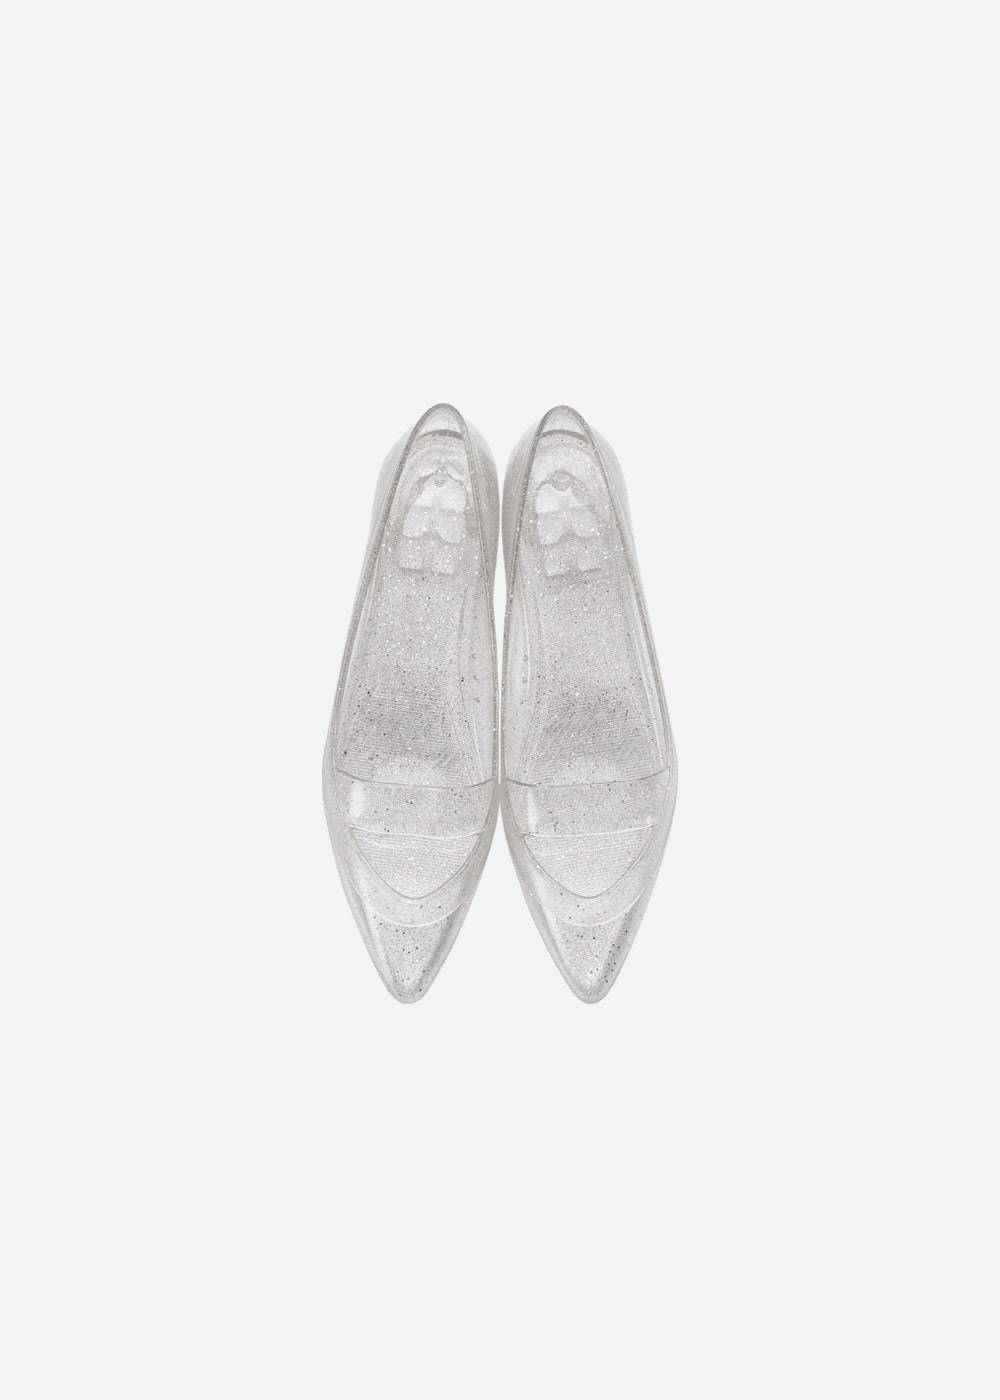 heavenly jelly shoes